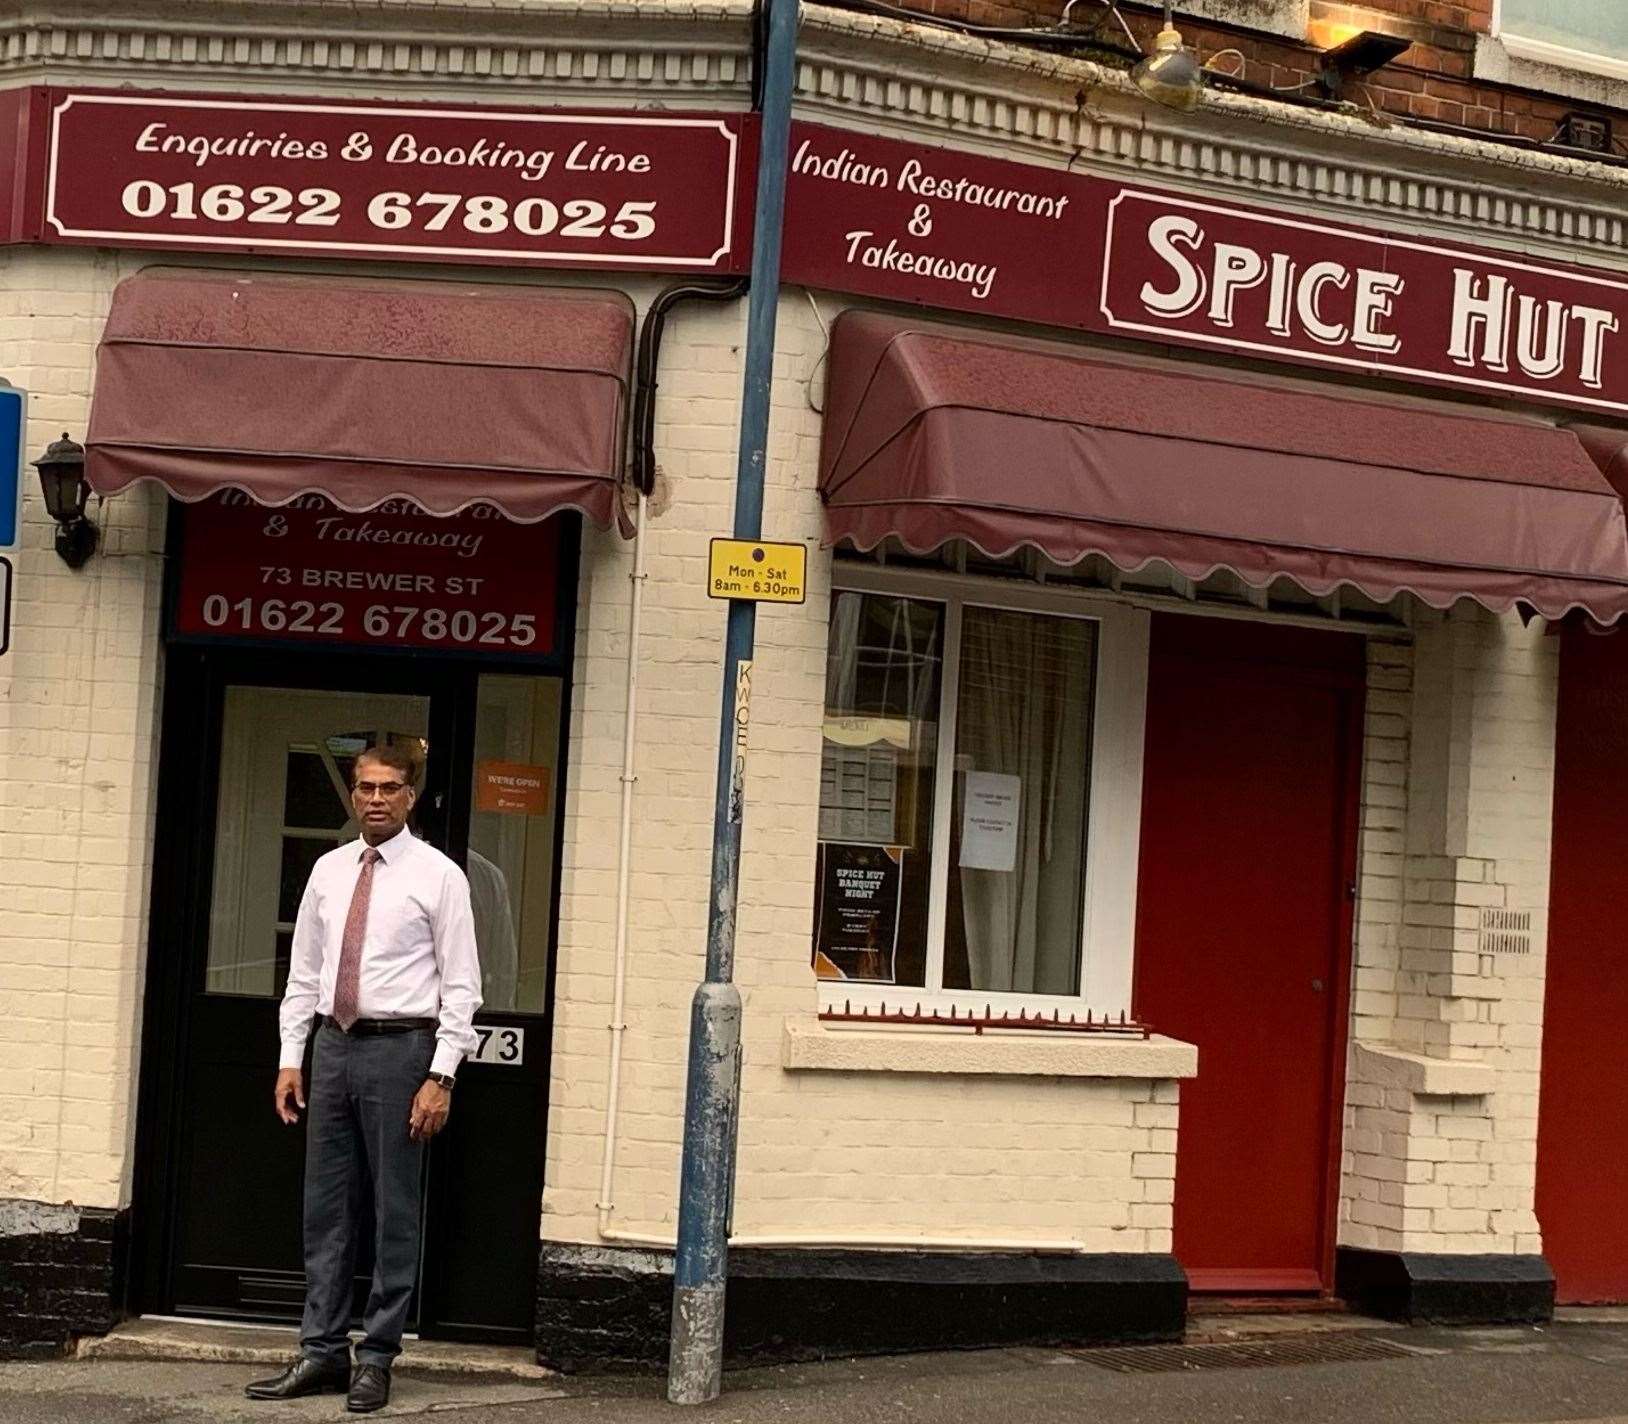 Owner Tipu Chowdhury has run the Indian restaurant since it opened 23 years ago and is happy with the new score, but is expecting a five on the inspector's next visit